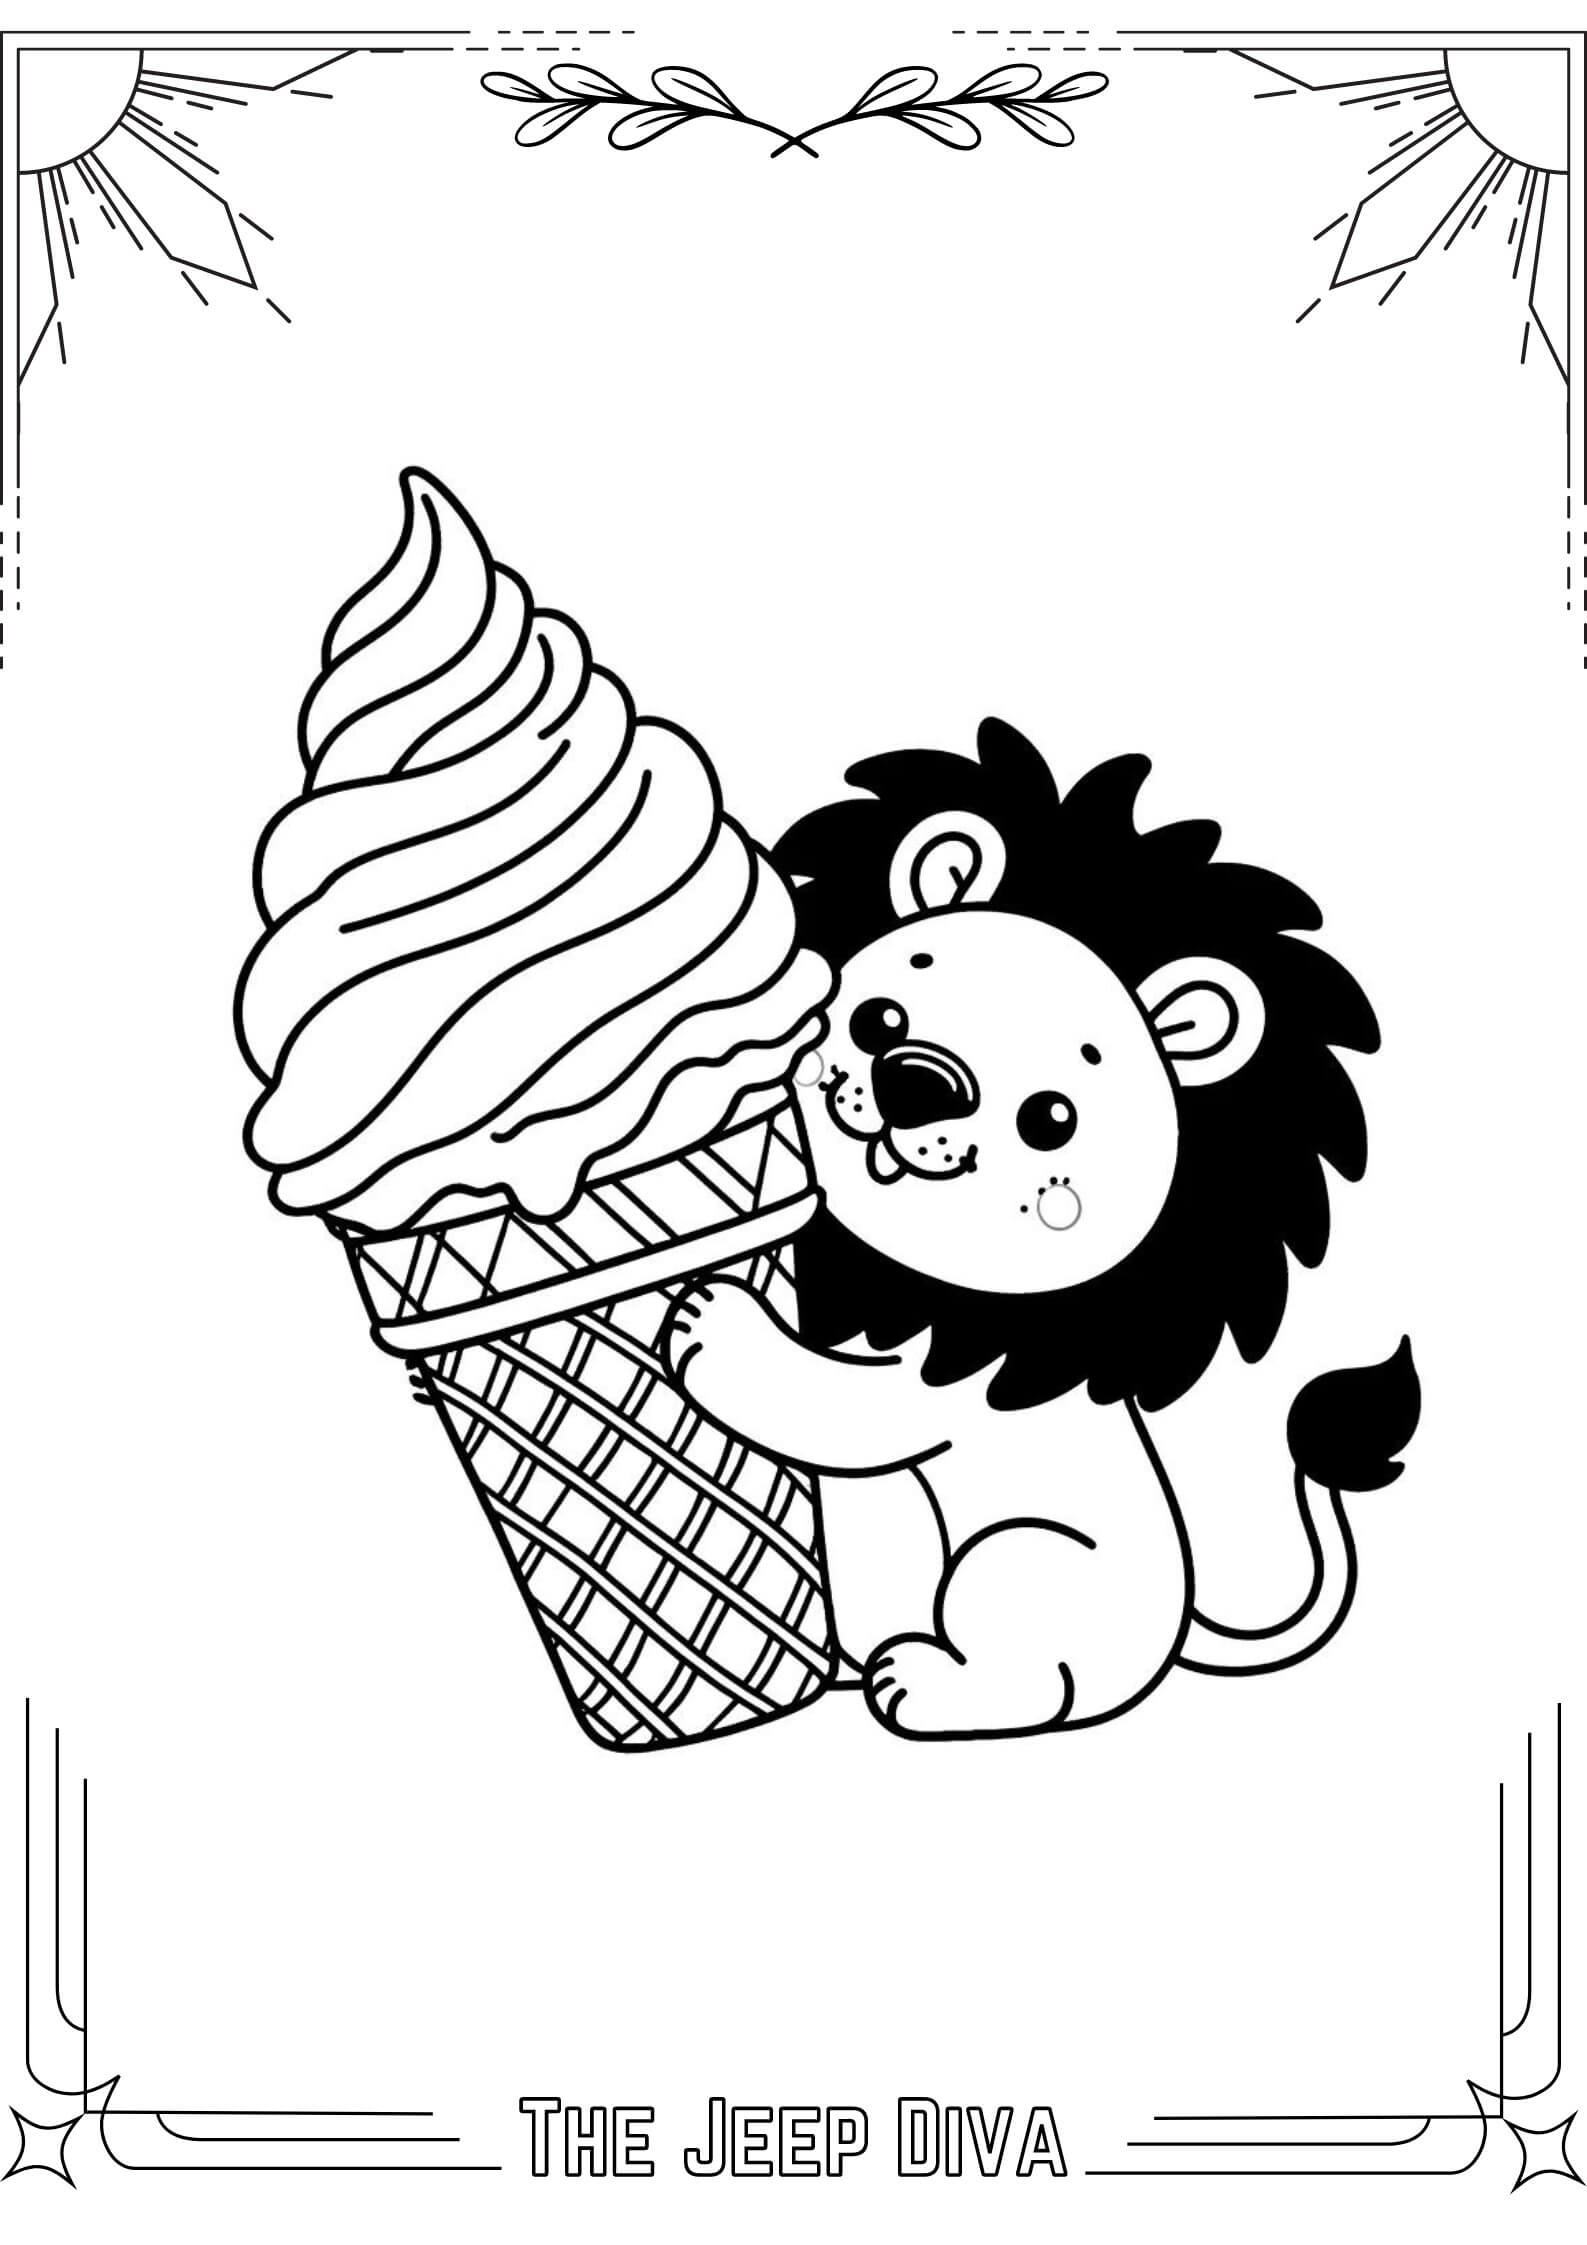 The Jeep Diva Coloring Page Lion Medium Difficulty 8